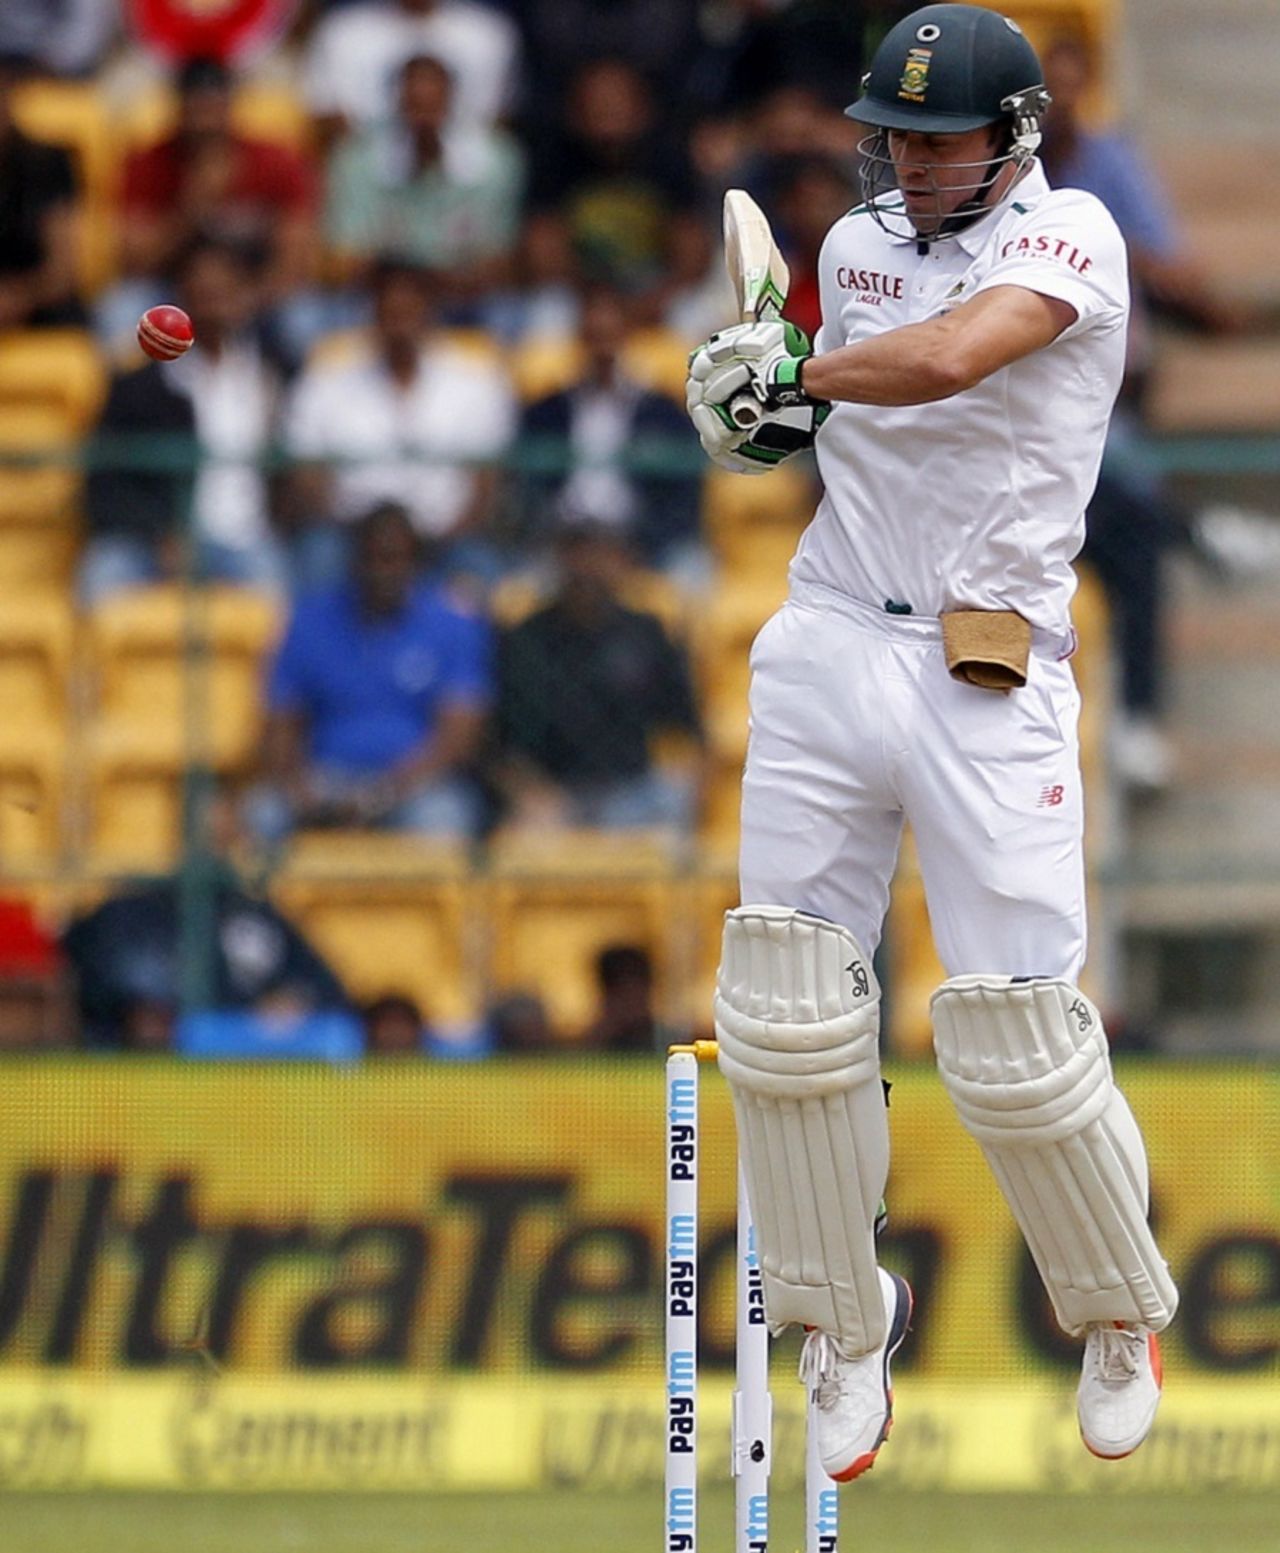 AB de Villiers rides out the bounce, India v South Africa, 2nd Test, 1st day, Bangalore, November 14, 2015